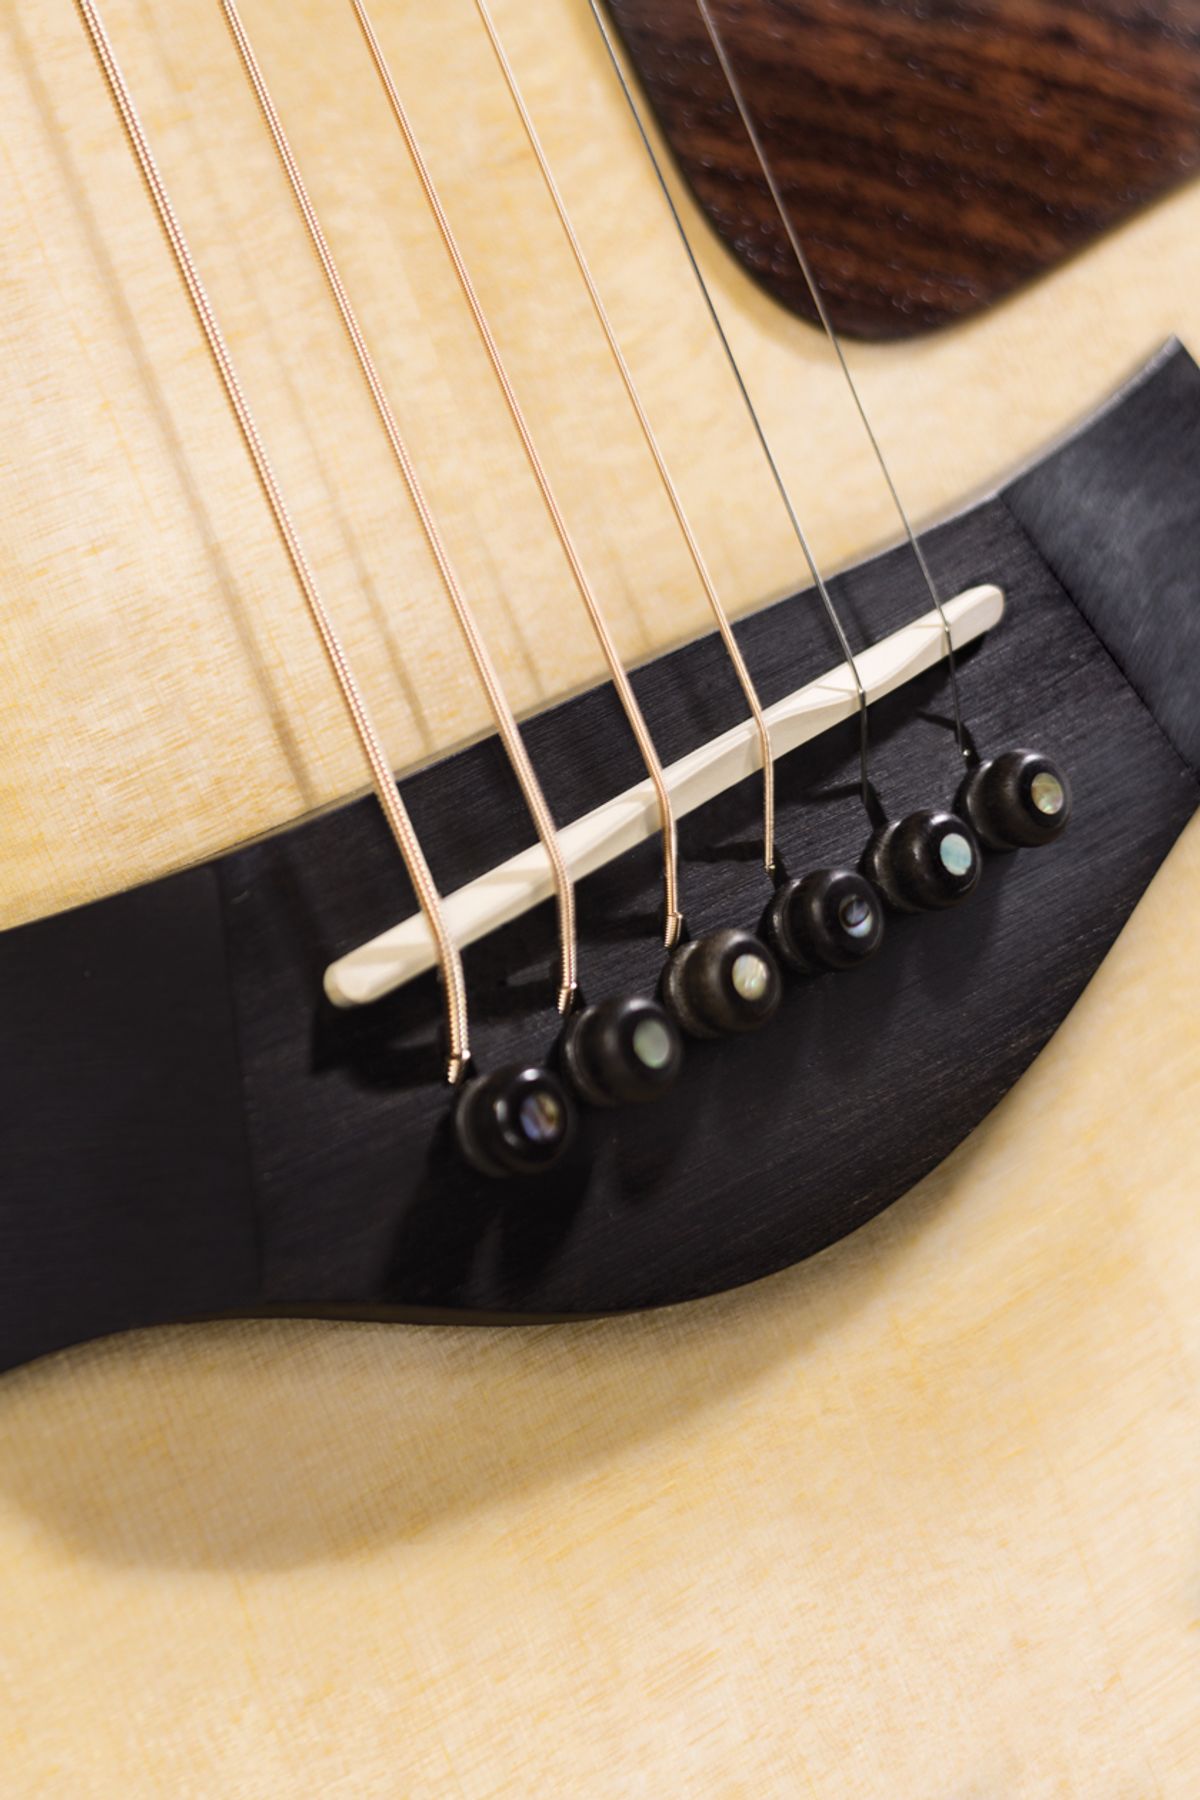 Acoustic Soundboard: High-Tension Wires